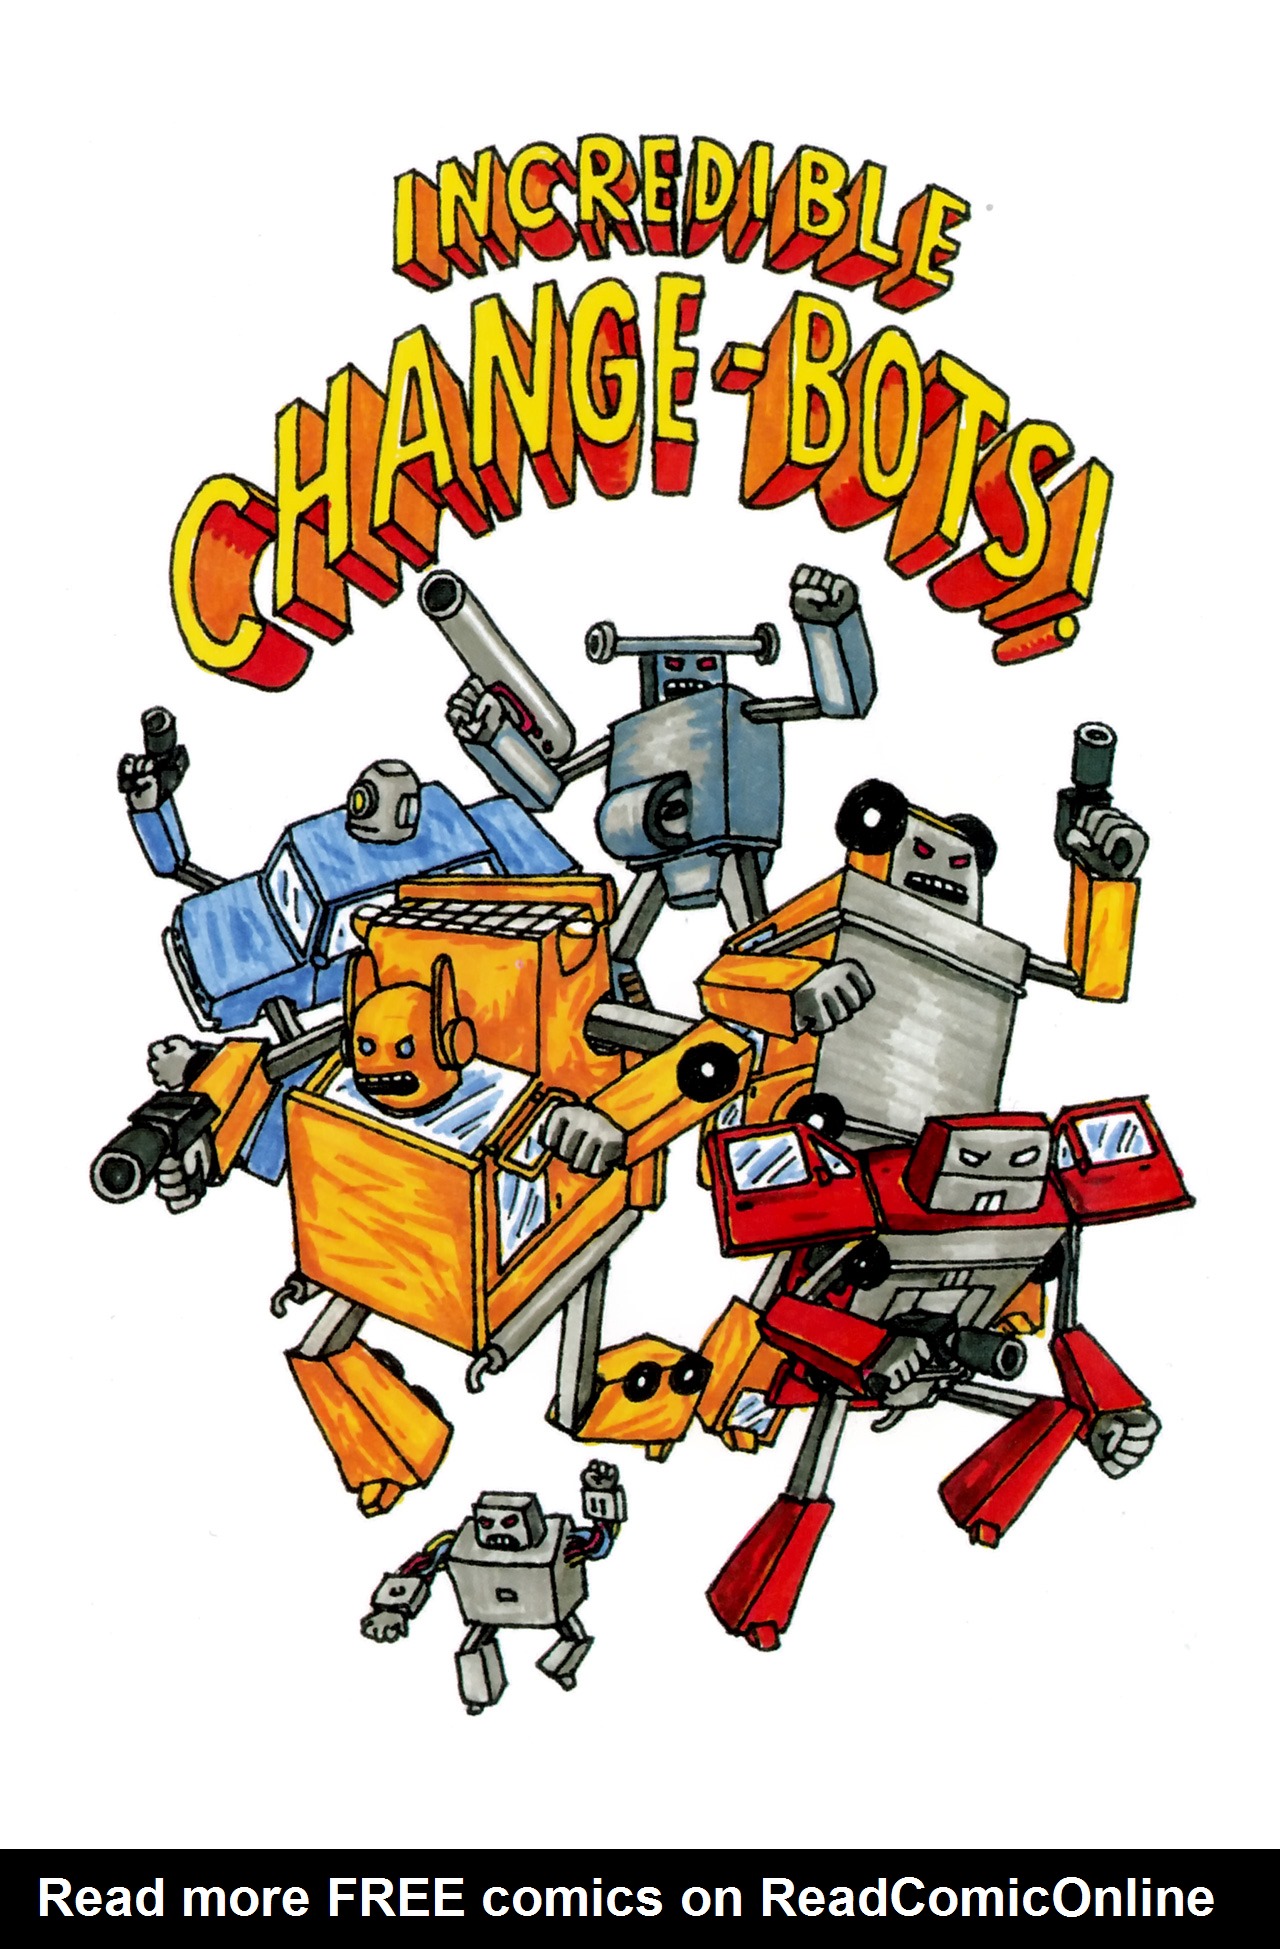 Read online Incredible Change-Bots comic -  Issue # TPB 1 - 140